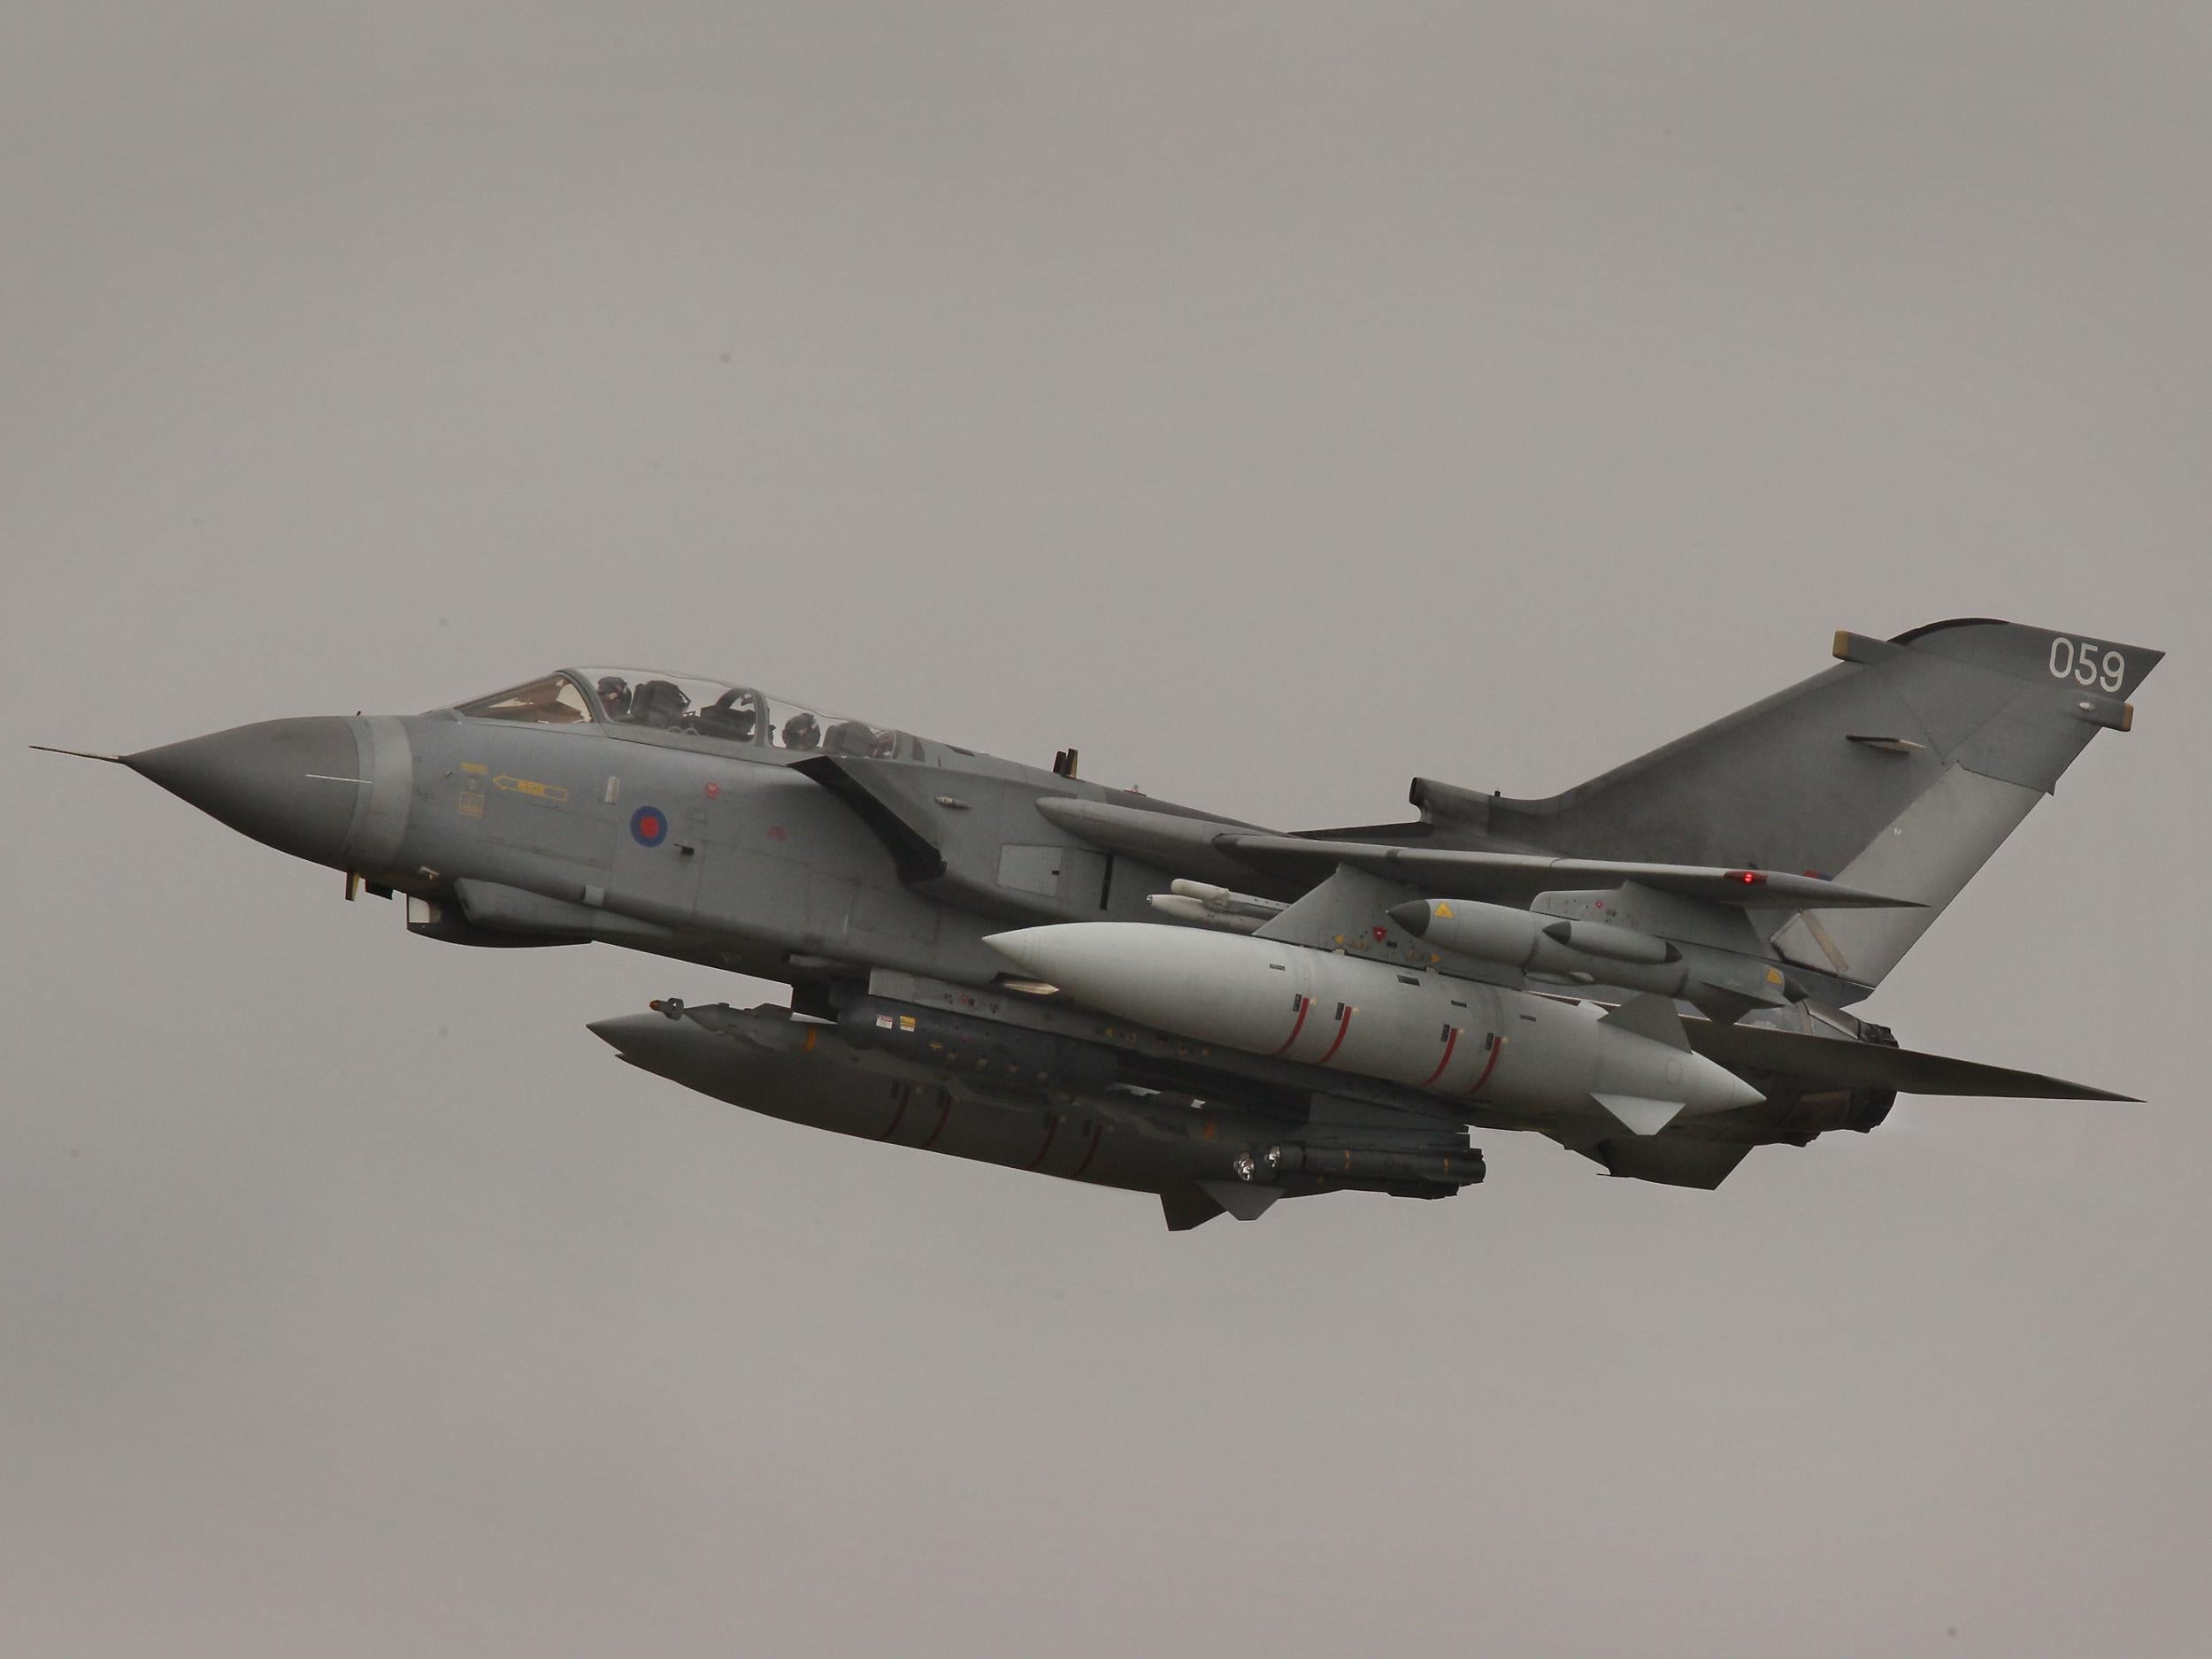 Reports allegedly said RAF Tornado fighters in Iraq had been fitted with missiles designed for aerial combat